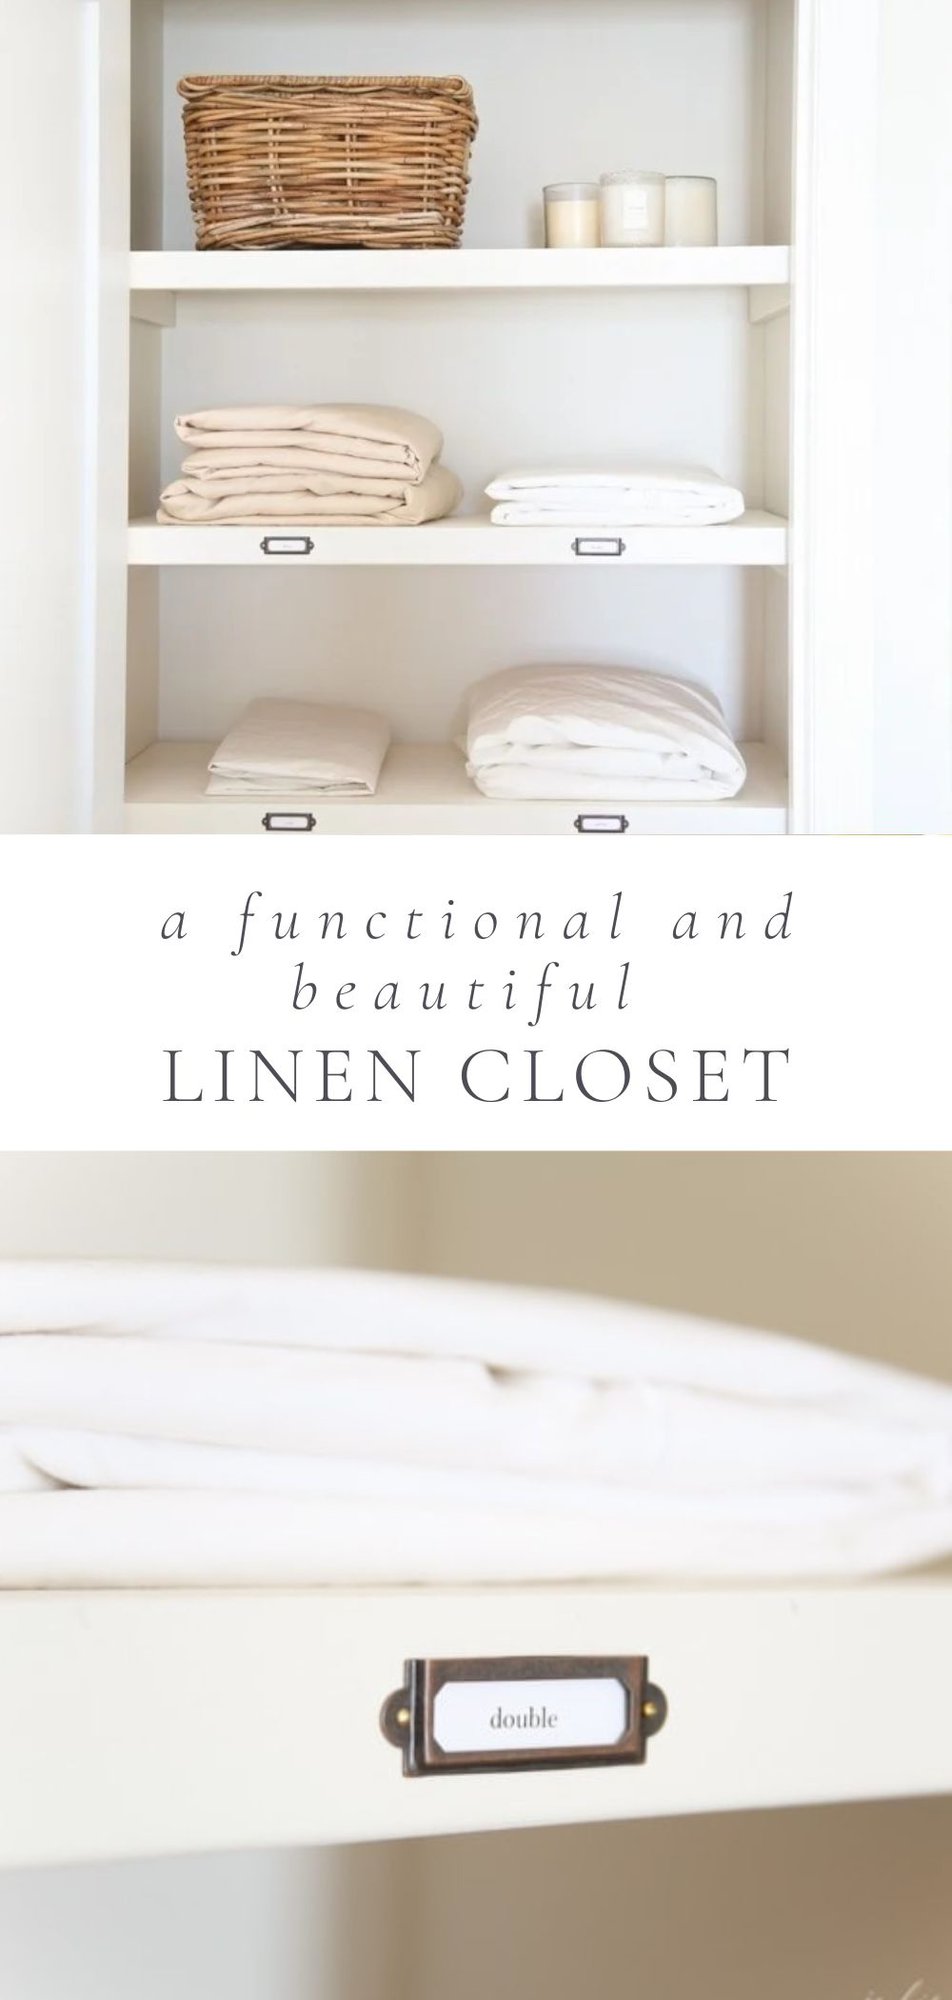 a picture of a linen closet with folded sheets and a picture of a shelf with a label for the sheet size